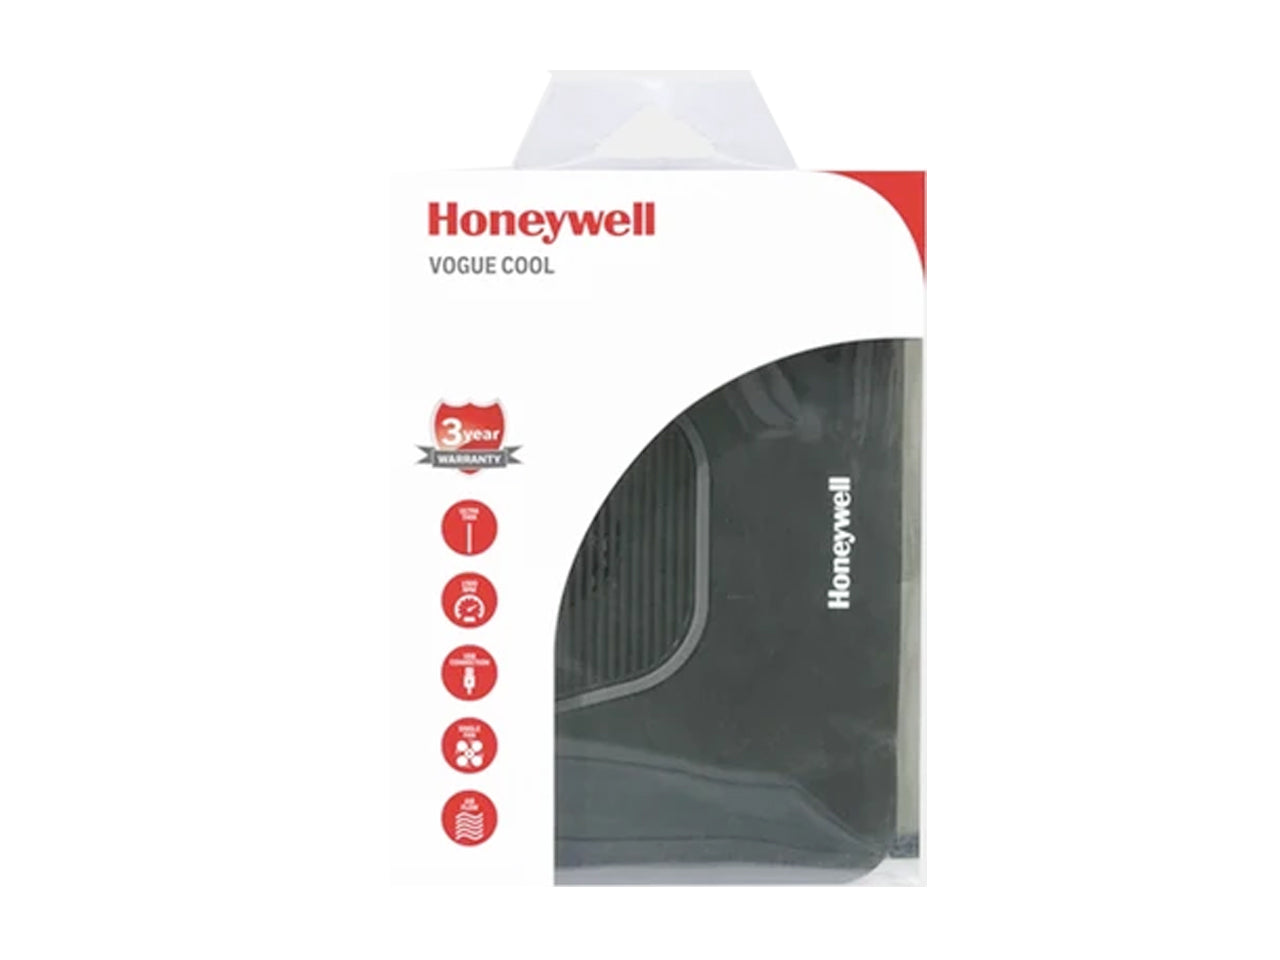 Honeywell Vogue Cool Laptop Cooling Pad